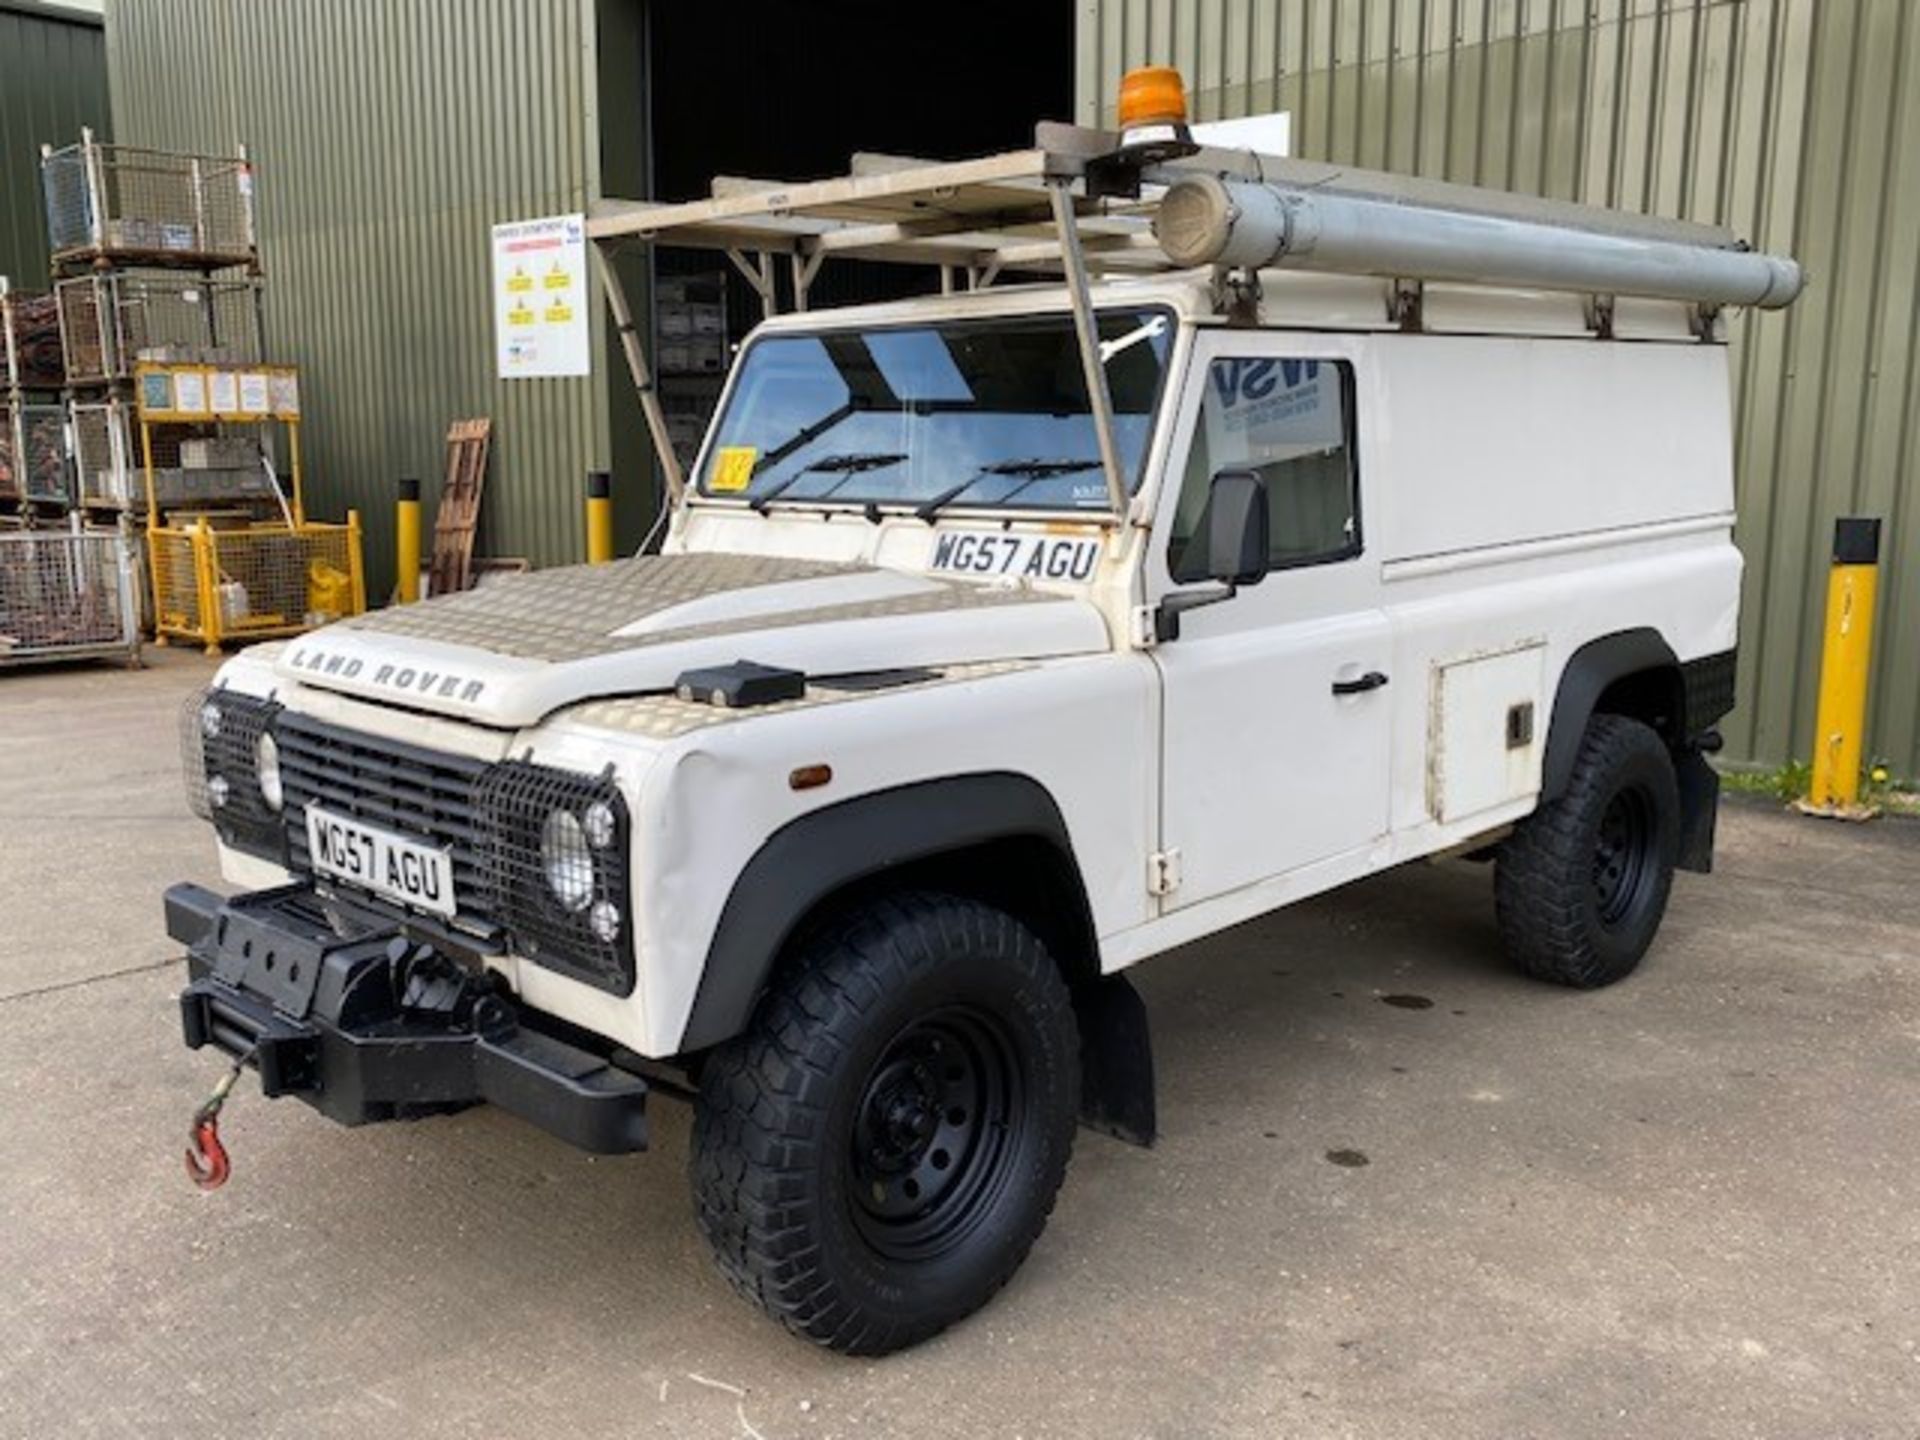 Land Rover Defender 110 Utility - Image 9 of 60